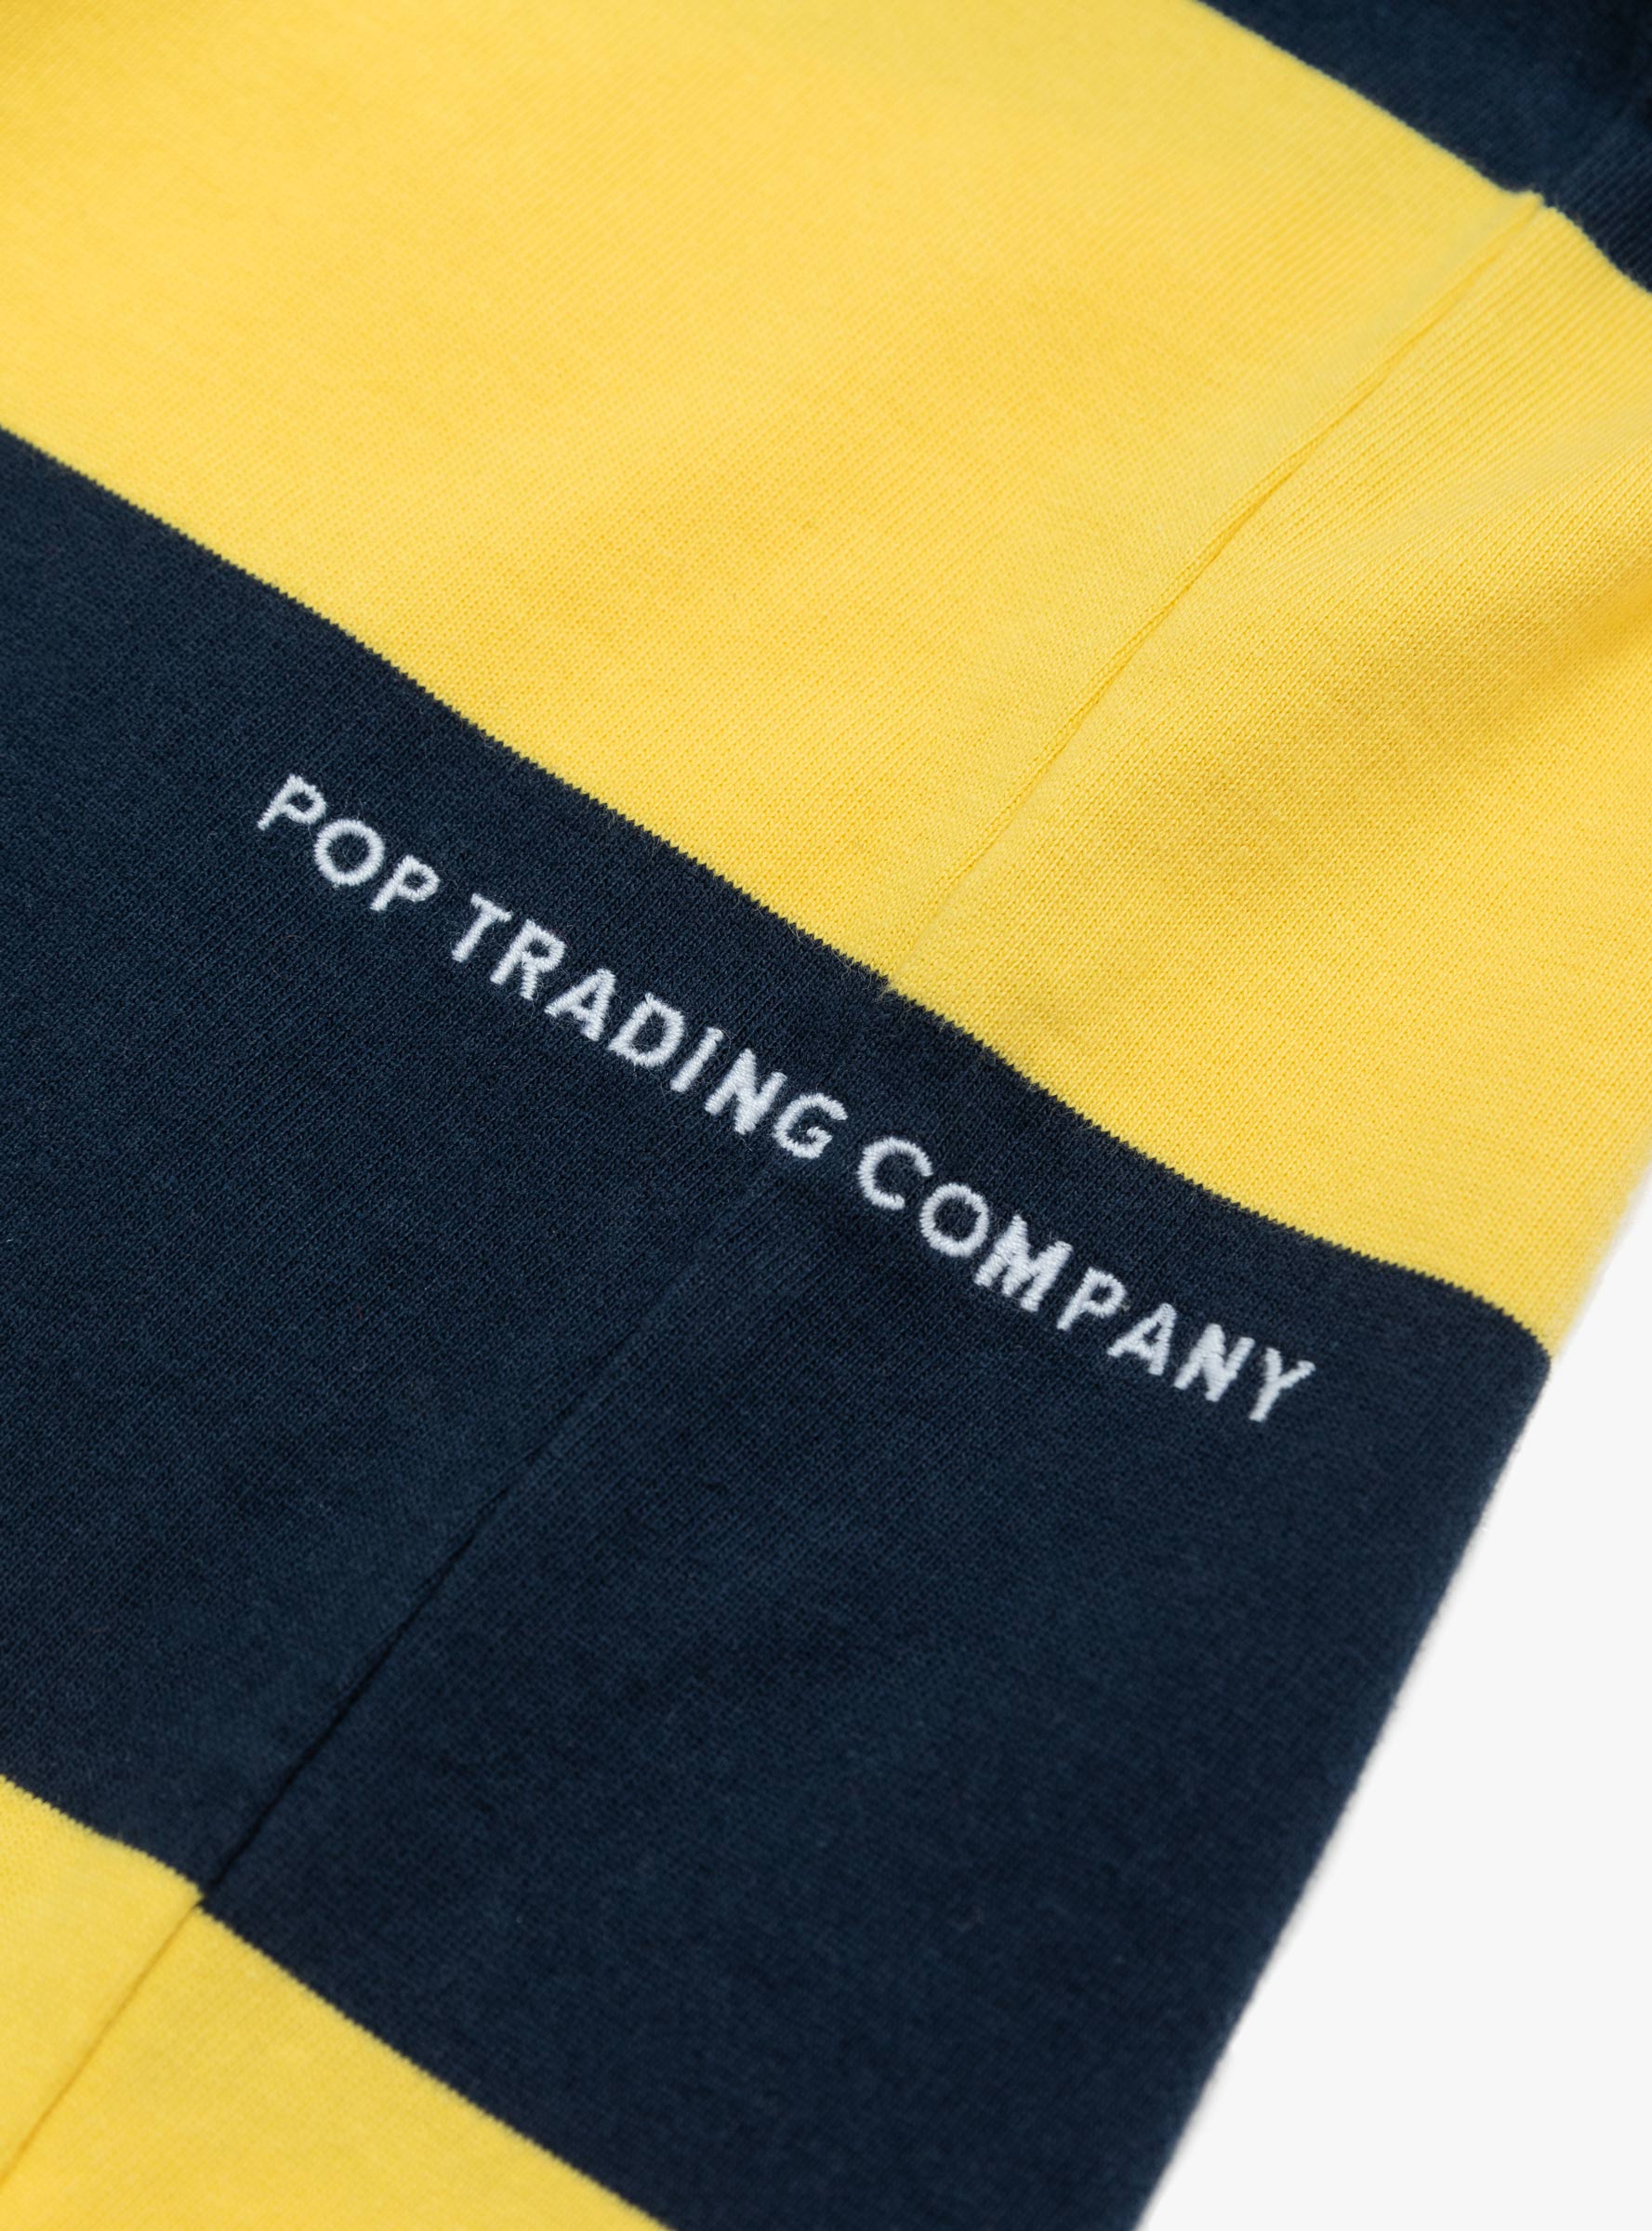 Pop Trading Company Pop Trading Company Striped Logo Rugby Polo Sweater Snapdragon - Size: Medium